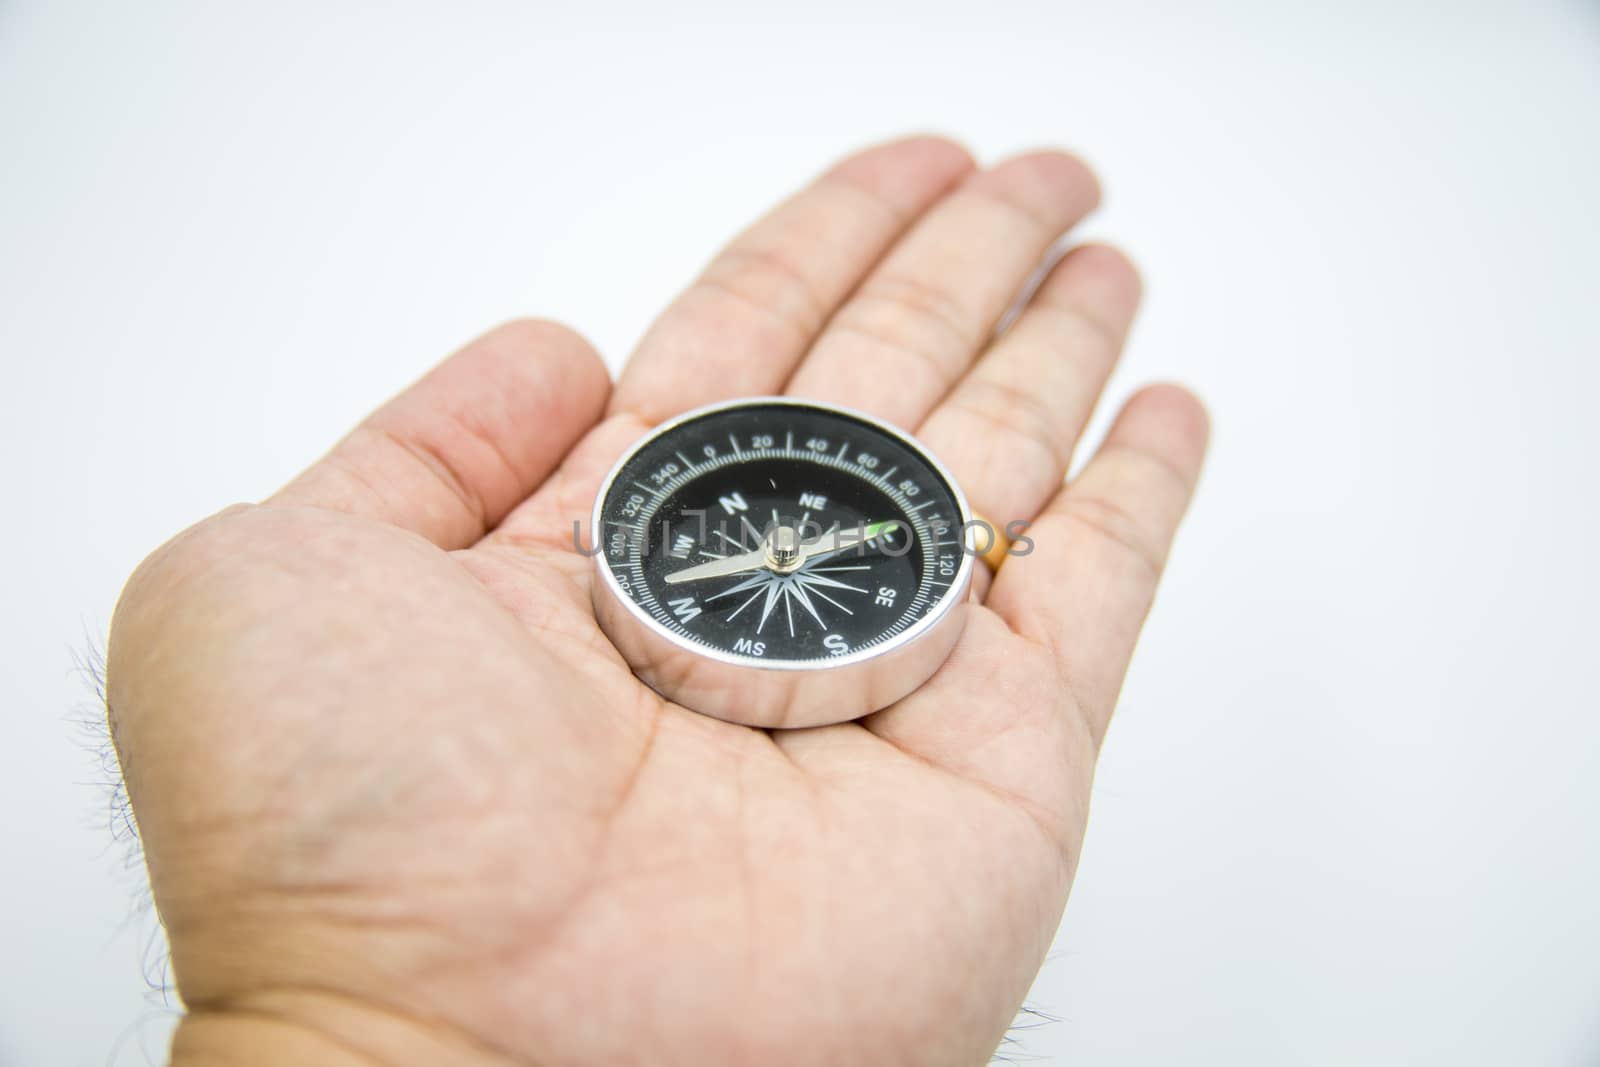 The compass on my hand is in a white background.